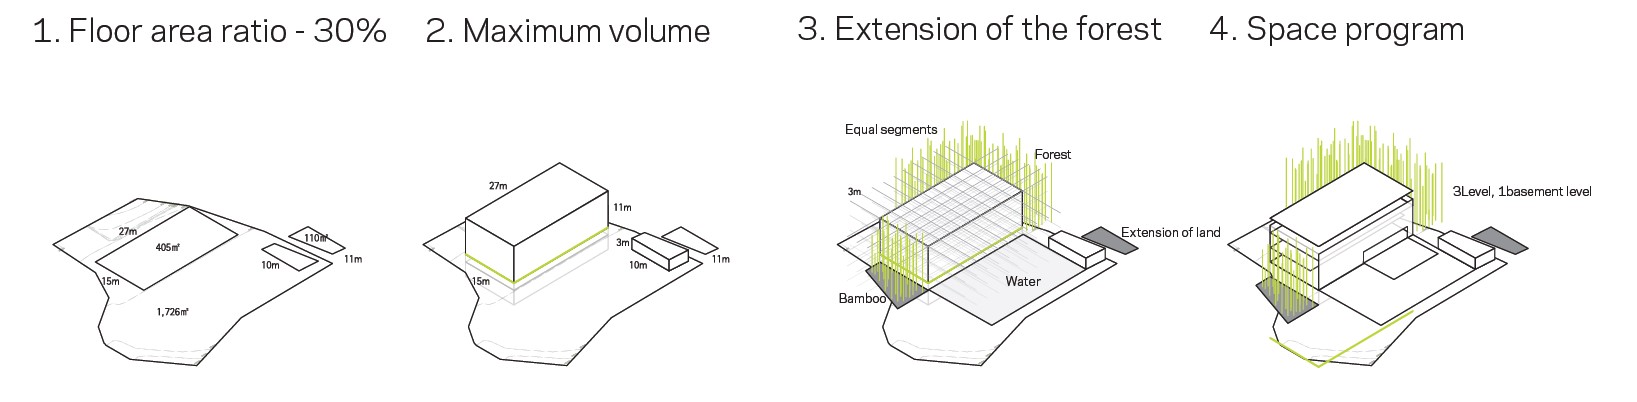 A sequential diagram to demonstrate the design concept of the architecture.